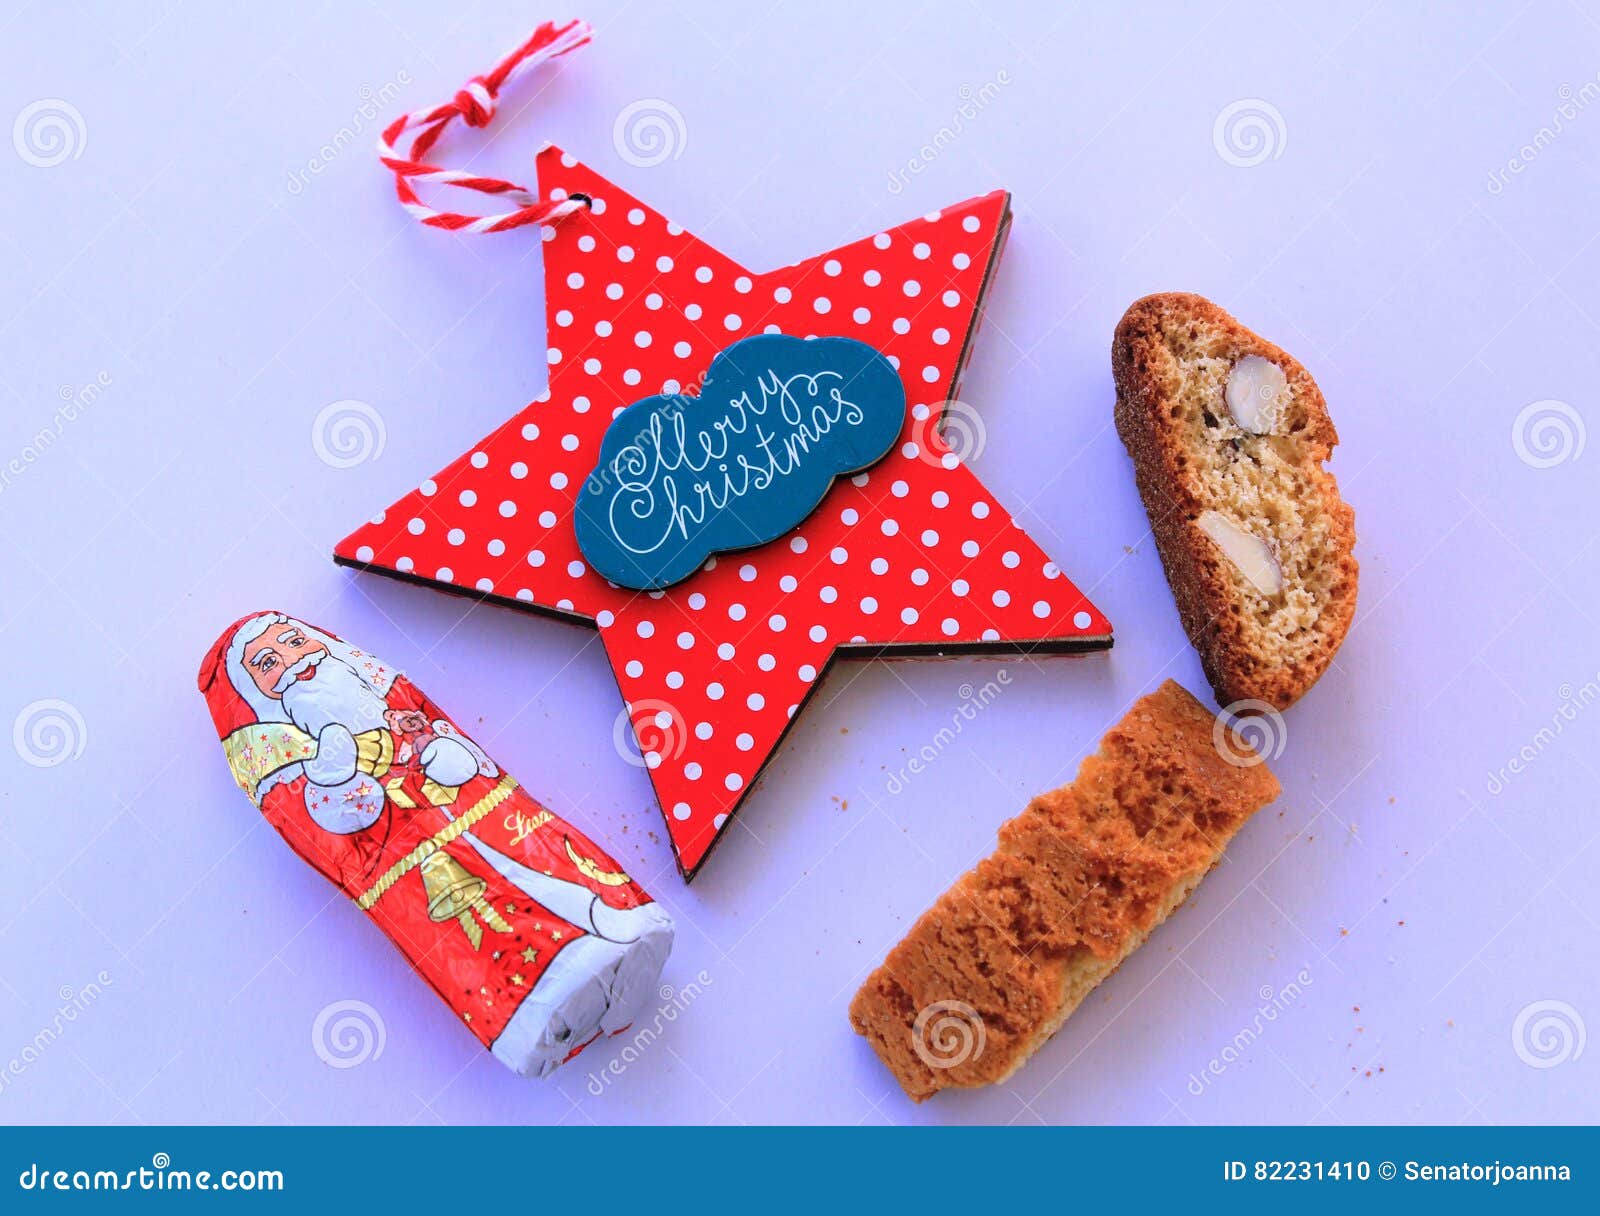 729 Warm Wishes Holiday Season Stock Photos - Free & Royalty-Free Stock  Photos from Dreamstime